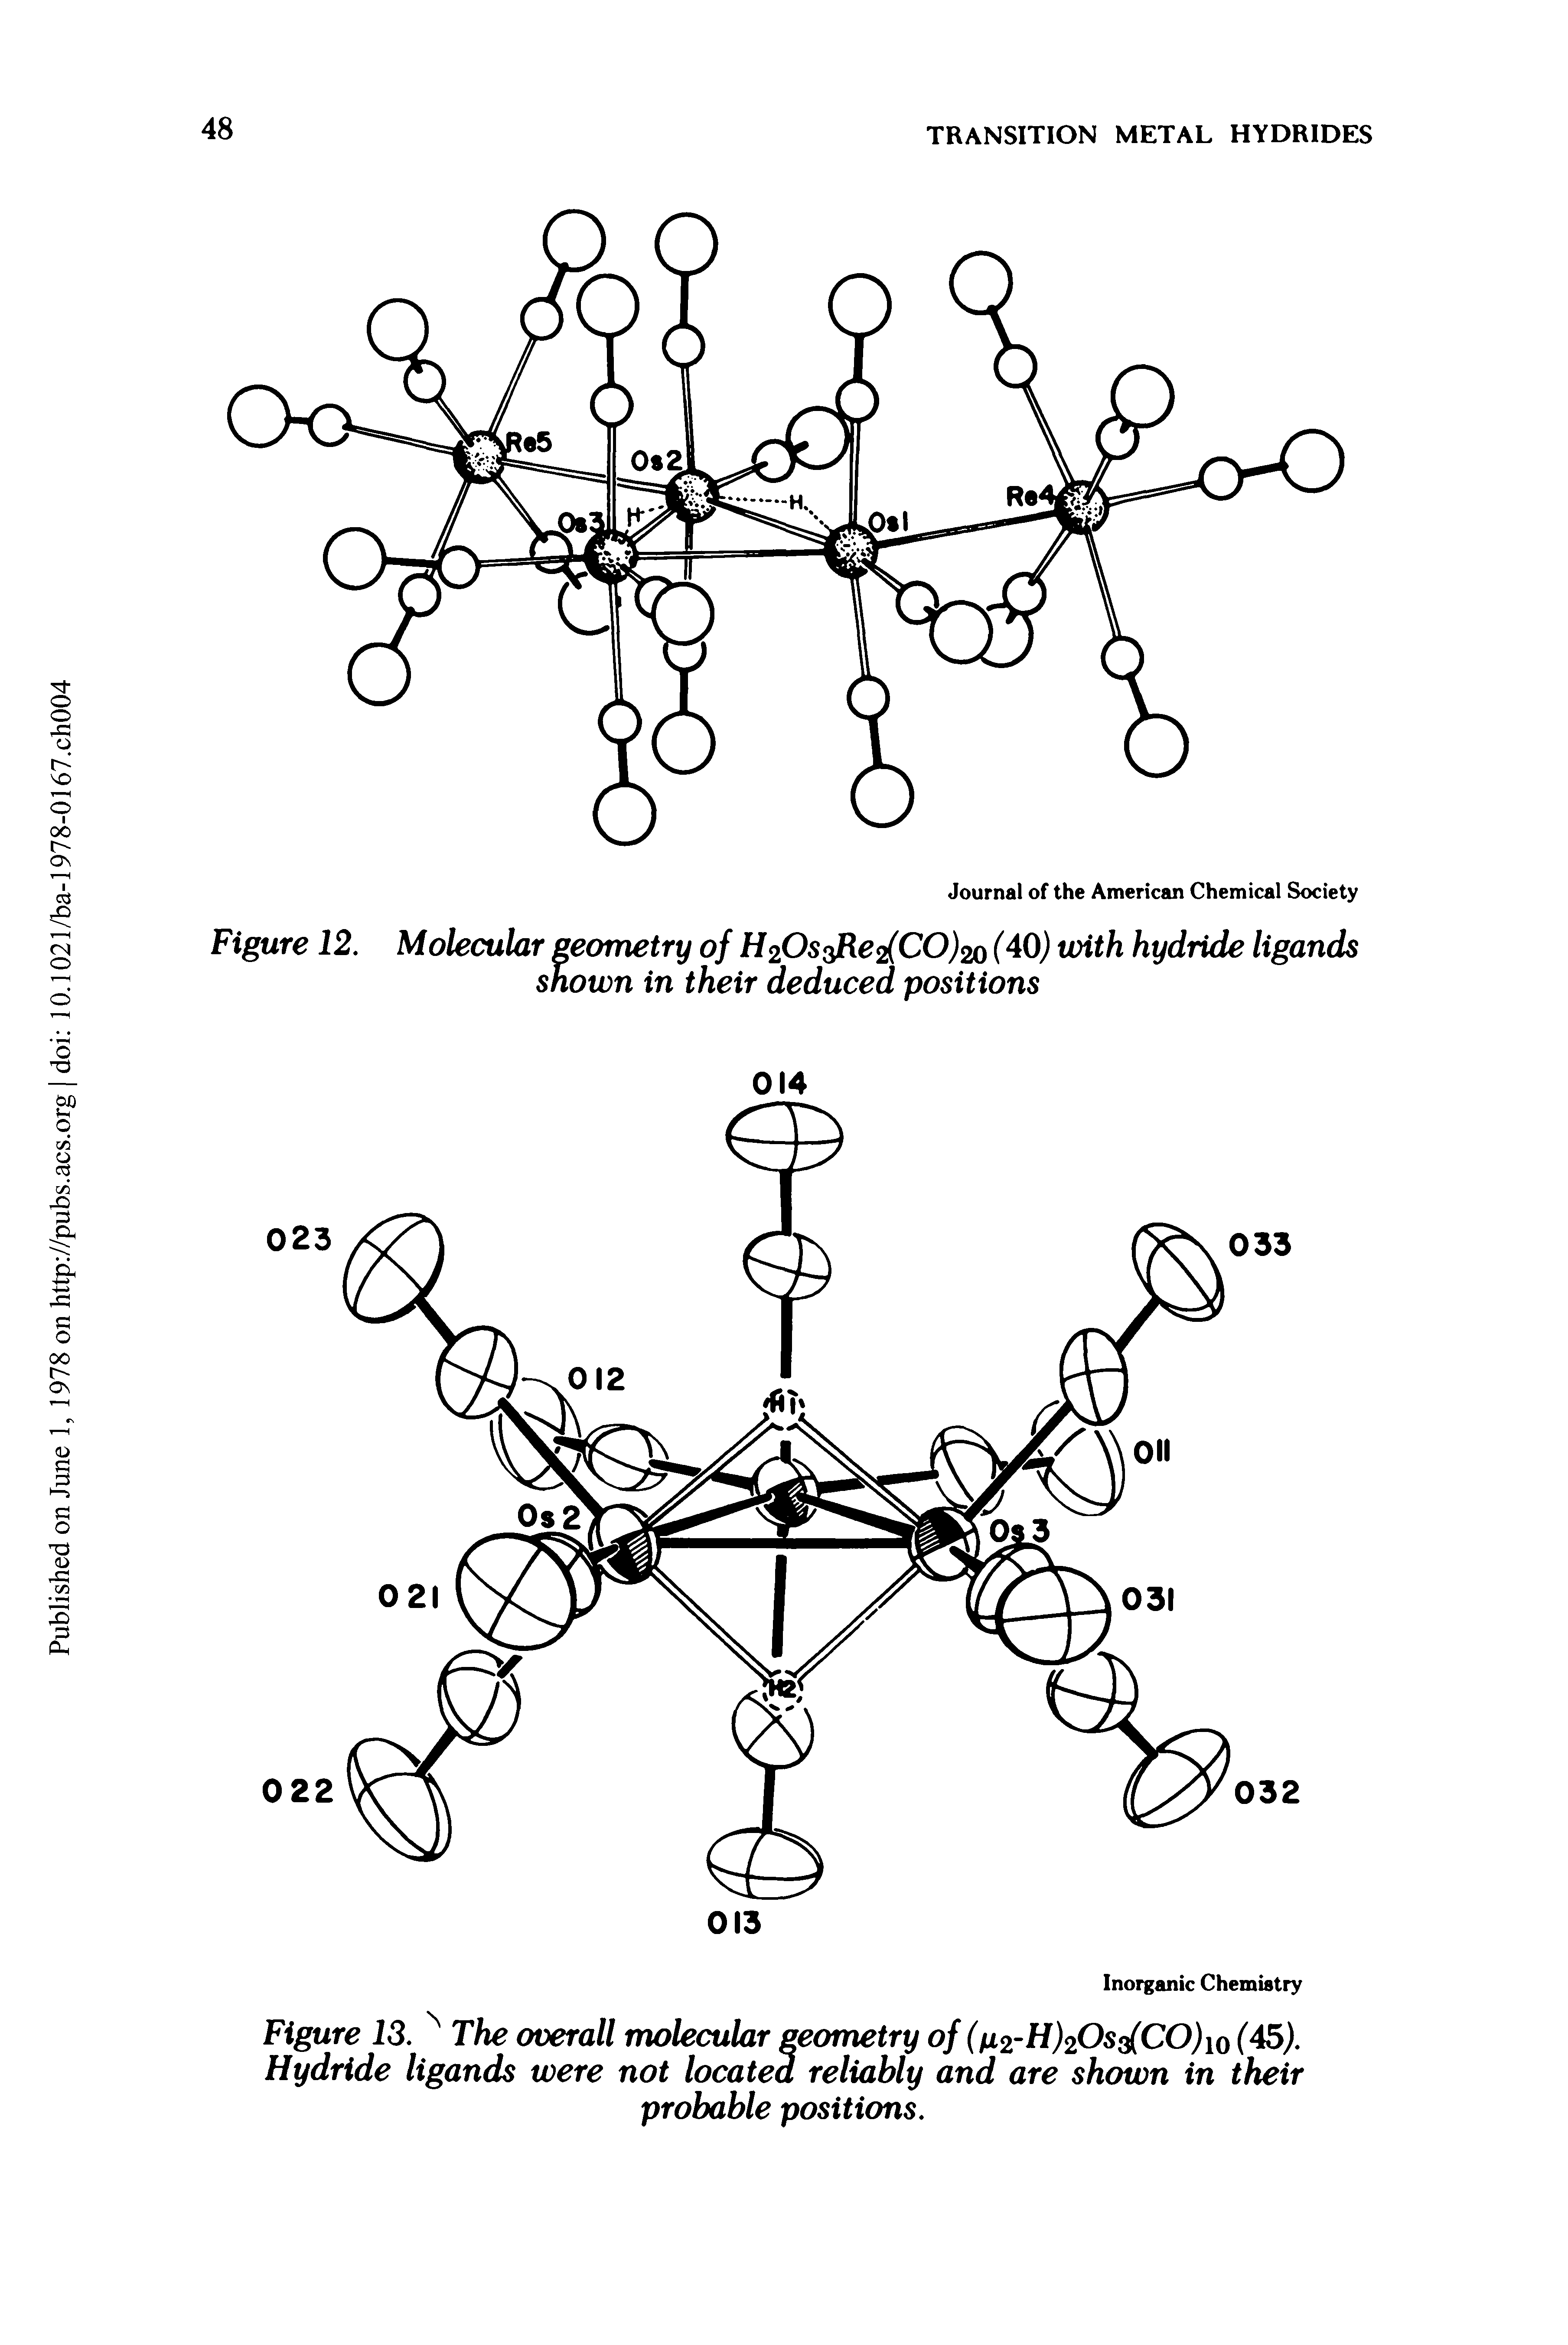 Figure 13. N The overall molecular geometry o/(/x2-H)2Os3(CO)io(45). Hydride ligands were not located reliably and are shown in their probable positions.